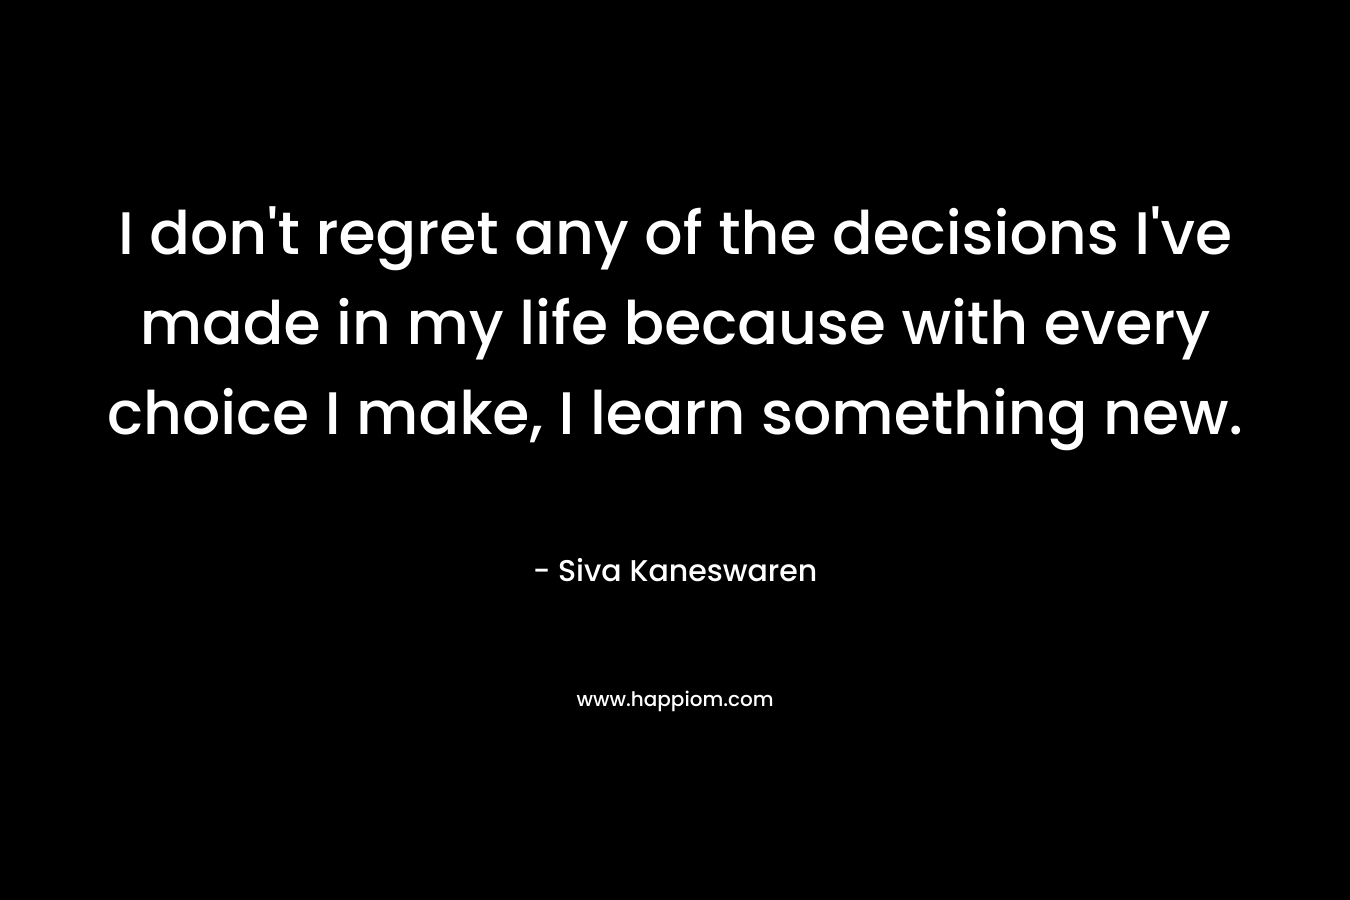 I don't regret any of the decisions I've made in my life because with every choice I make, I learn something new.